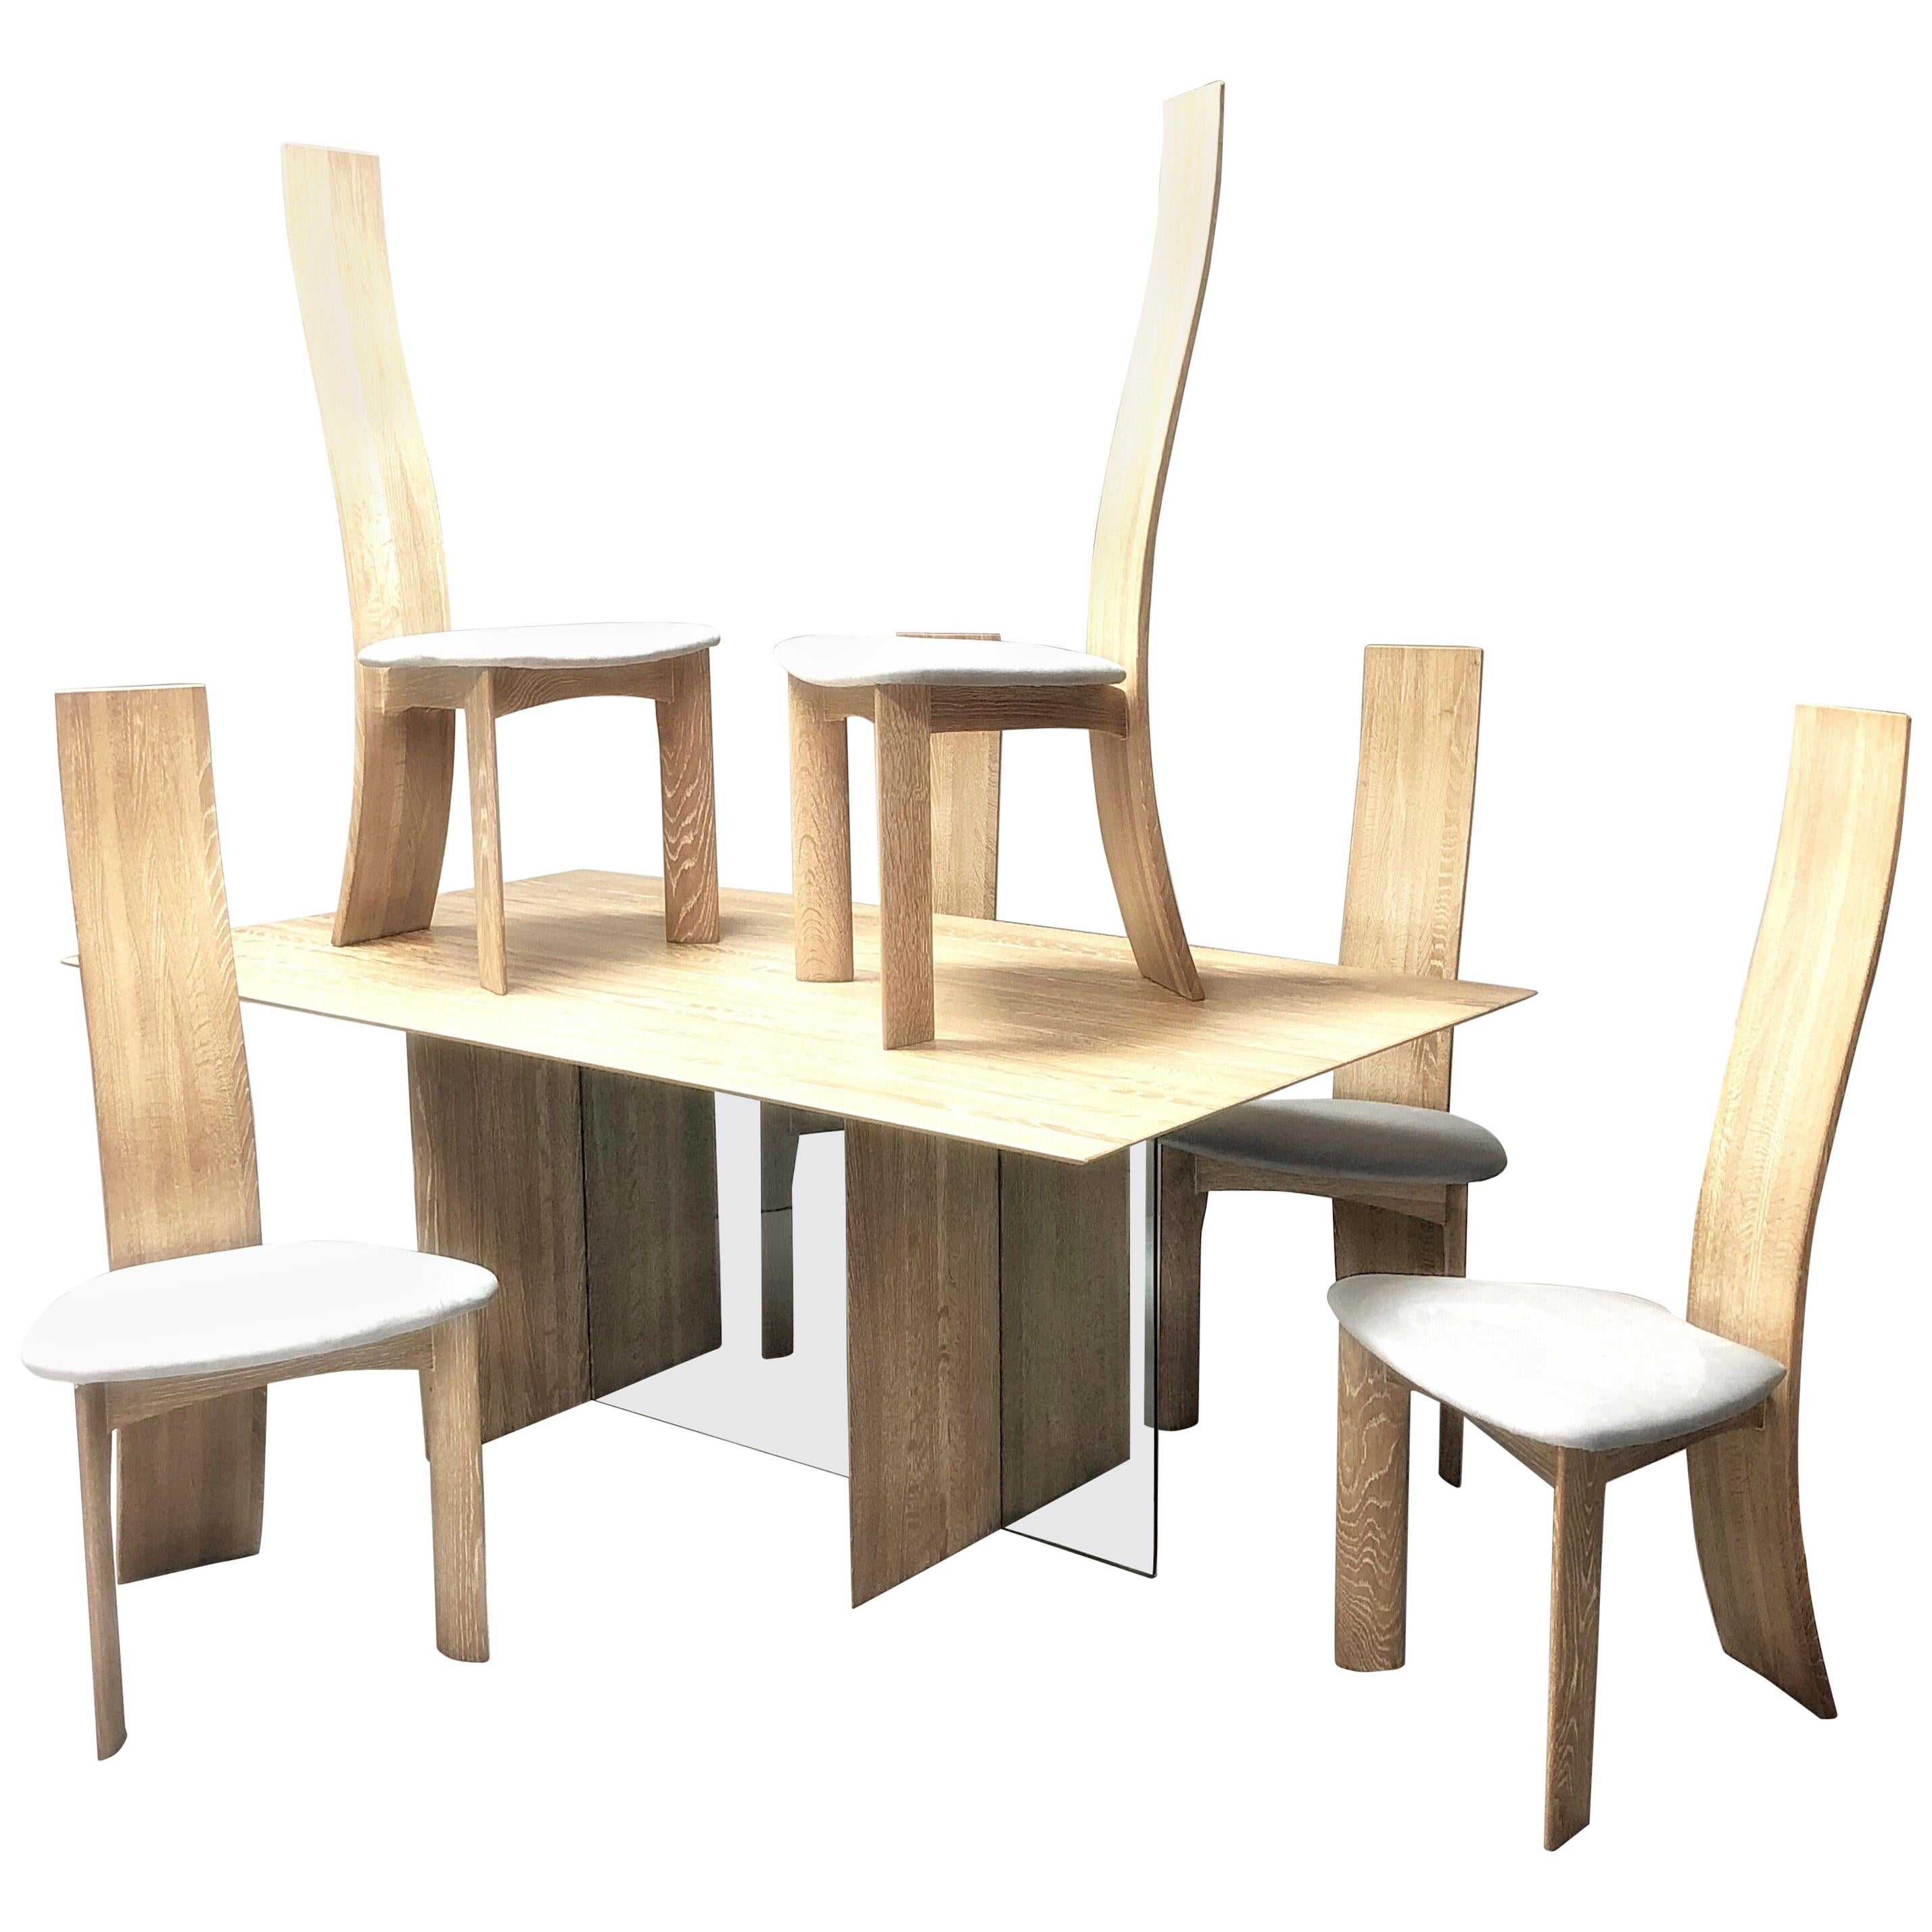 Bob & Dries Van Den Bergh Bleached Cerrused Oak Dining Set, Table and 6 Chairs